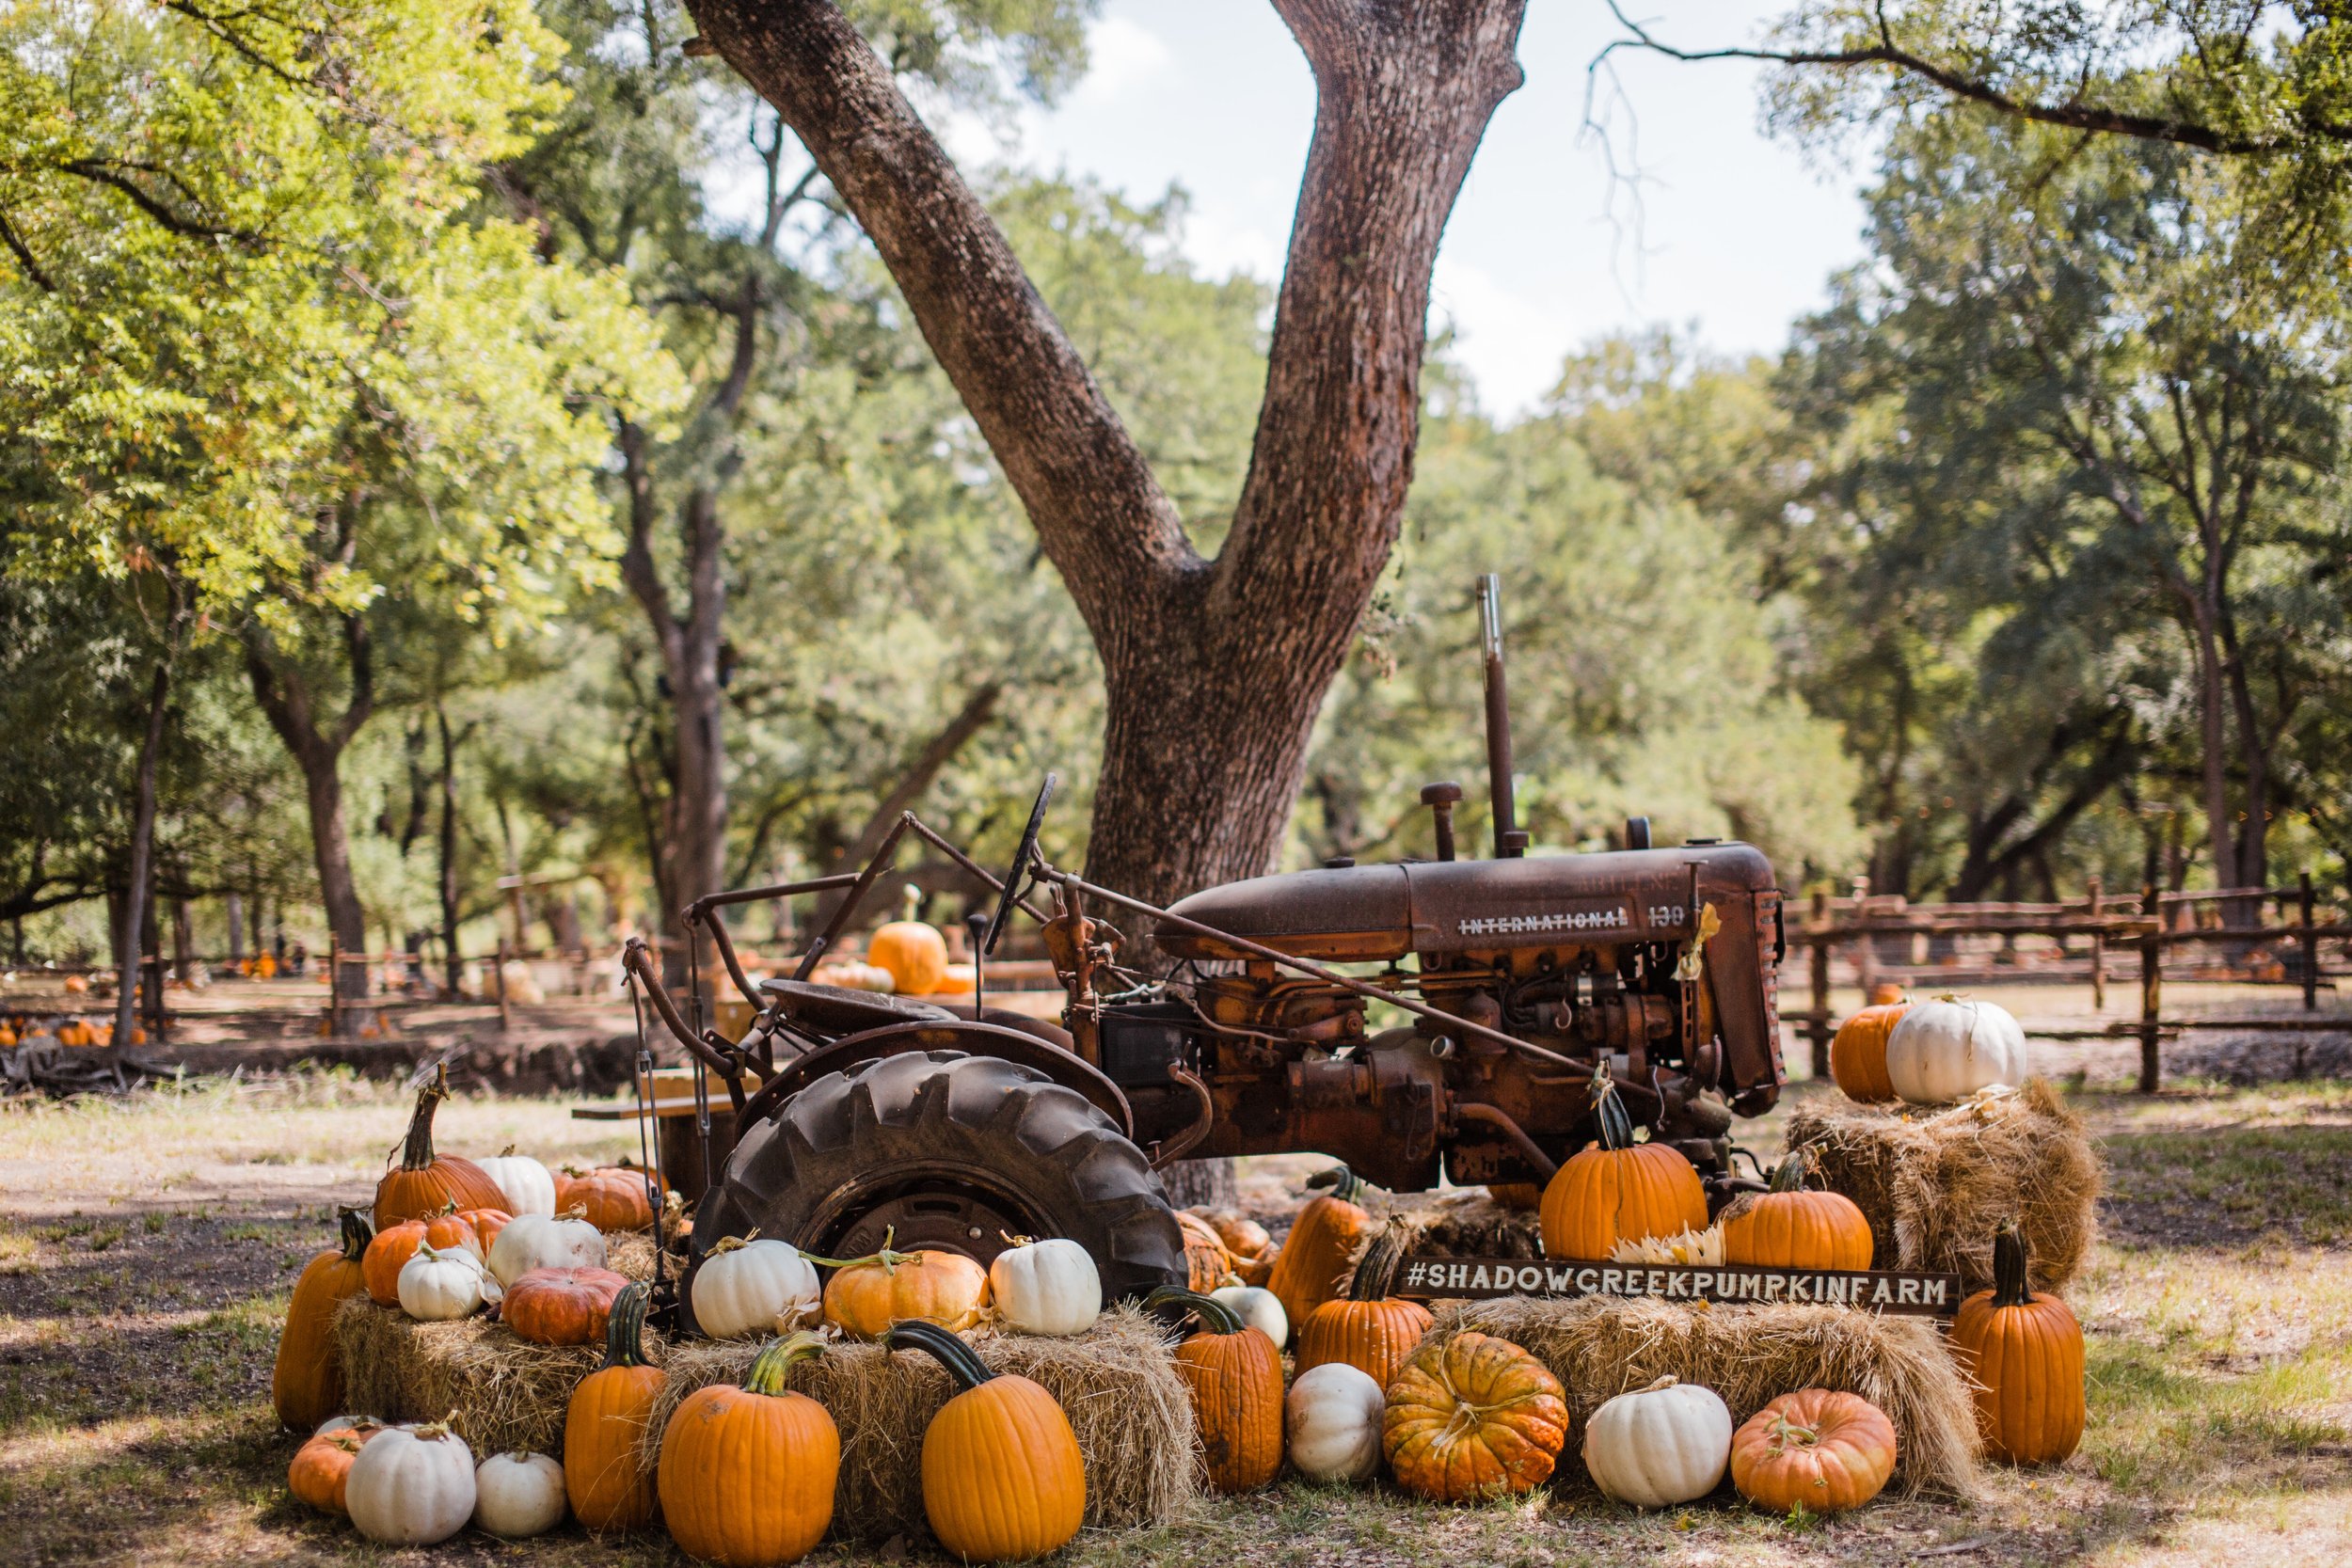 Pumpkin patch ideas: how to make more money from your pumpkin patch this Halloween &amp; beyond